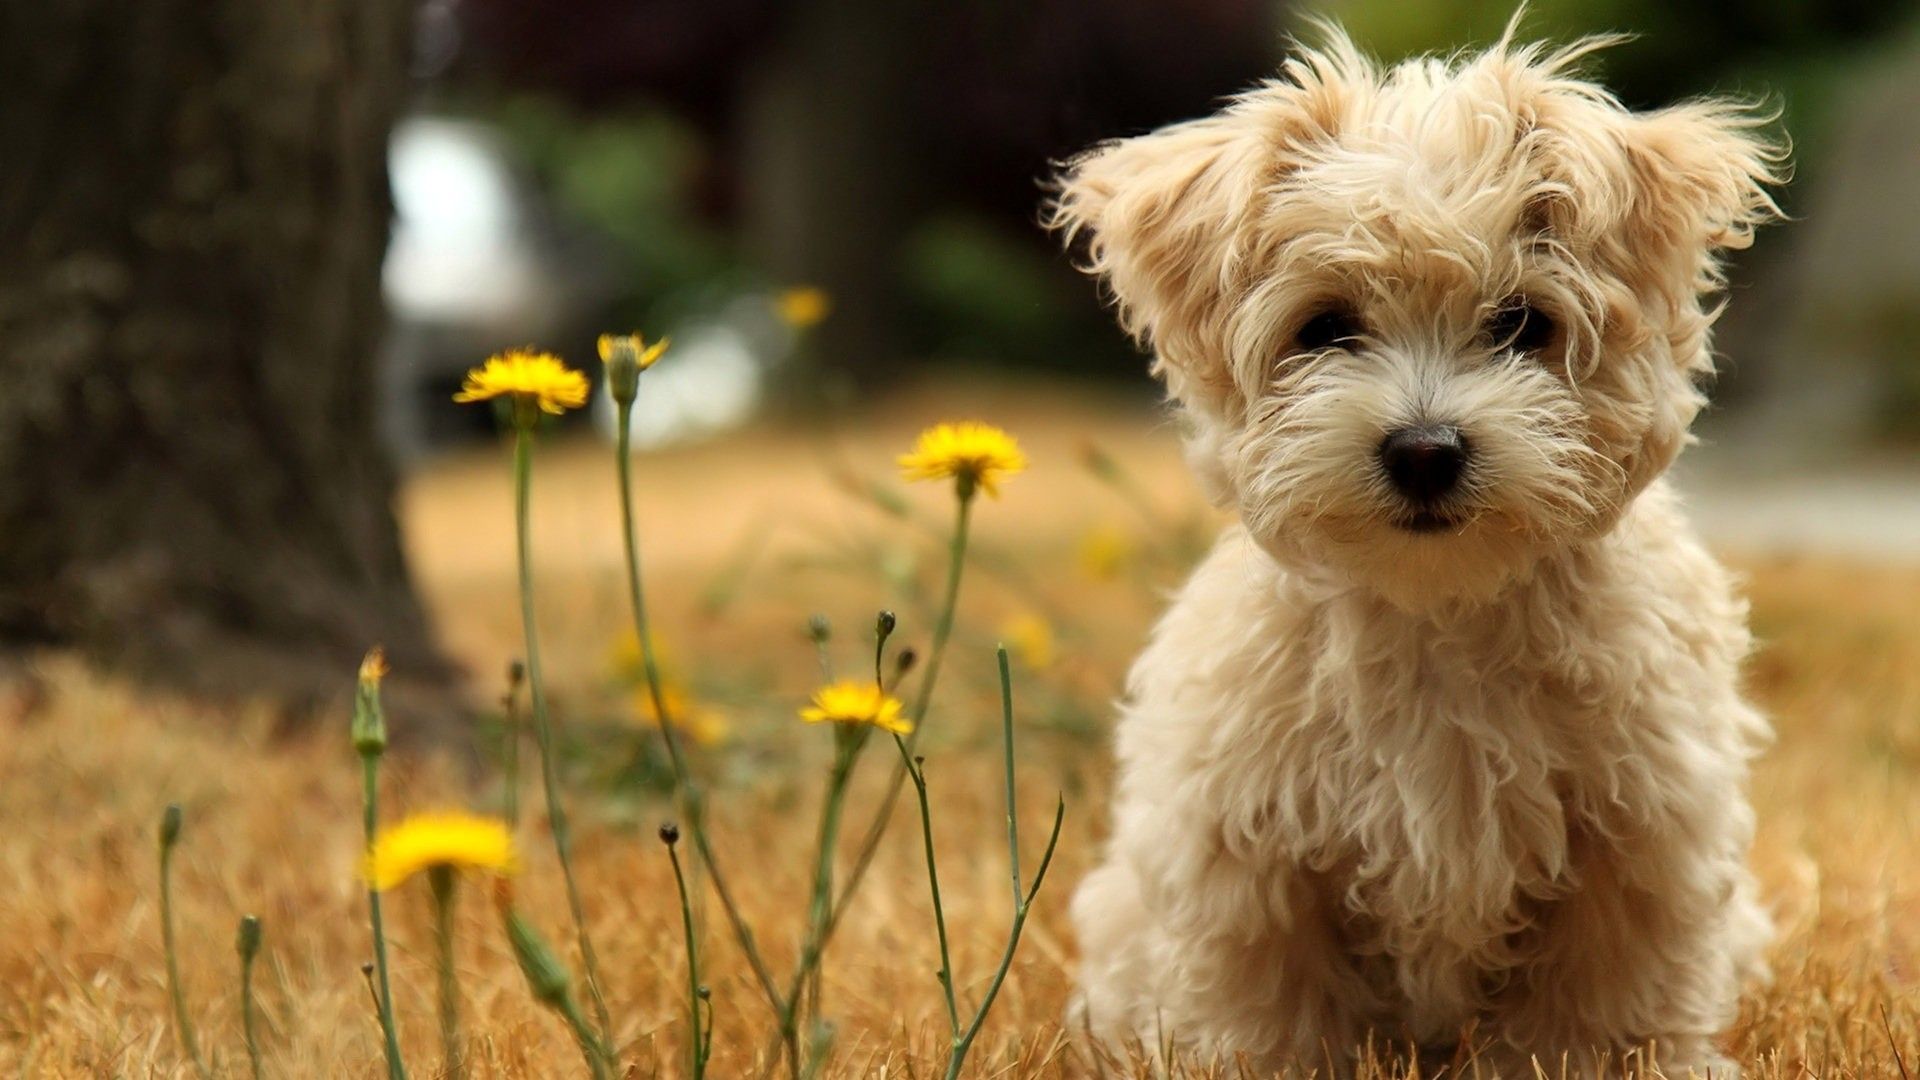 Dog Wallpapers   ShareChat Photos and Videos